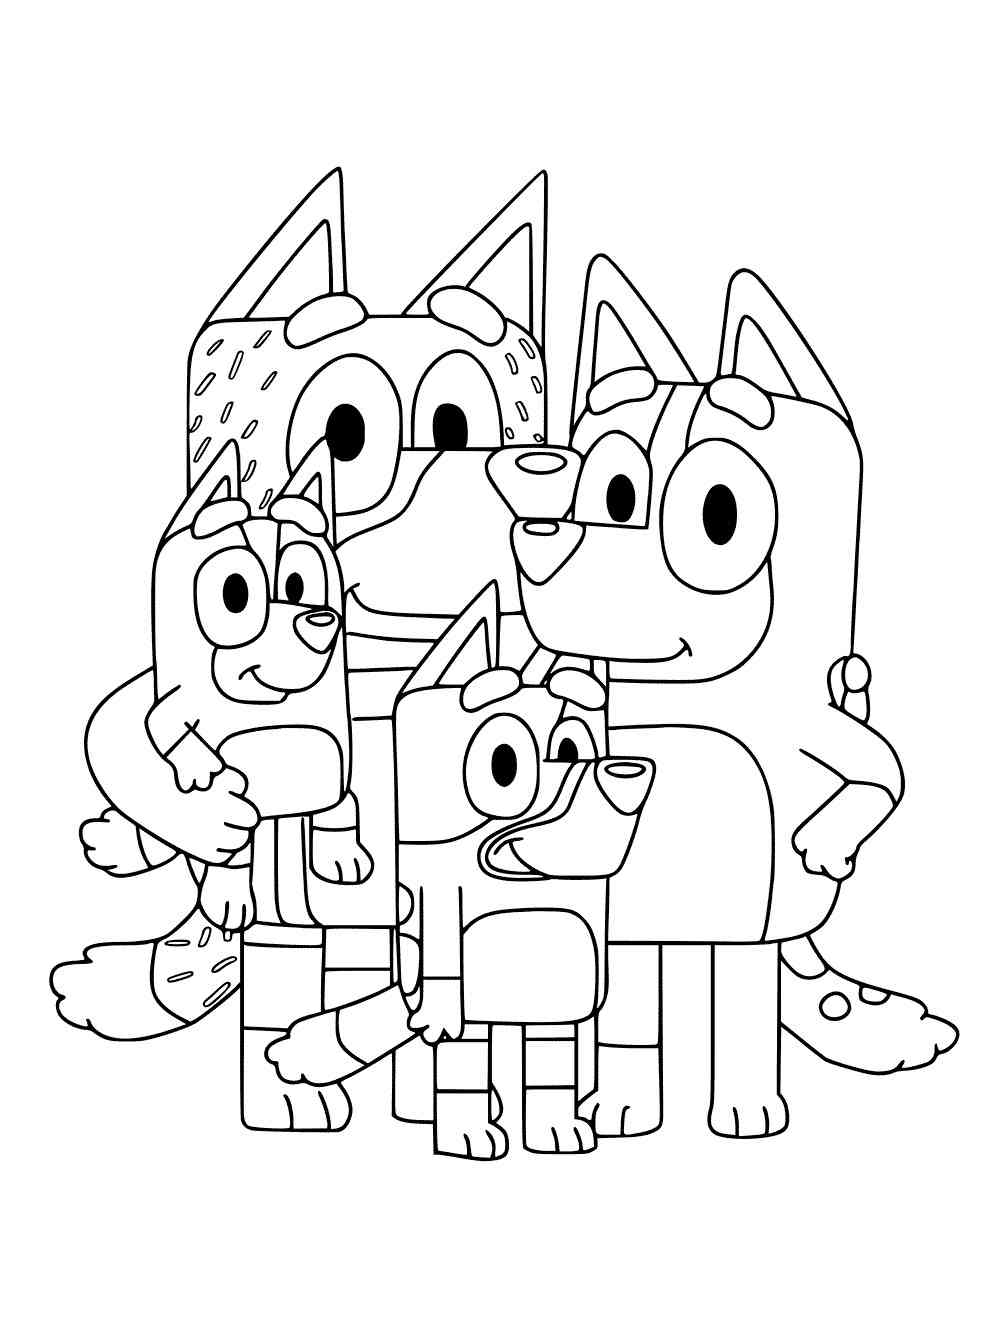 Bluey 5 coloring page